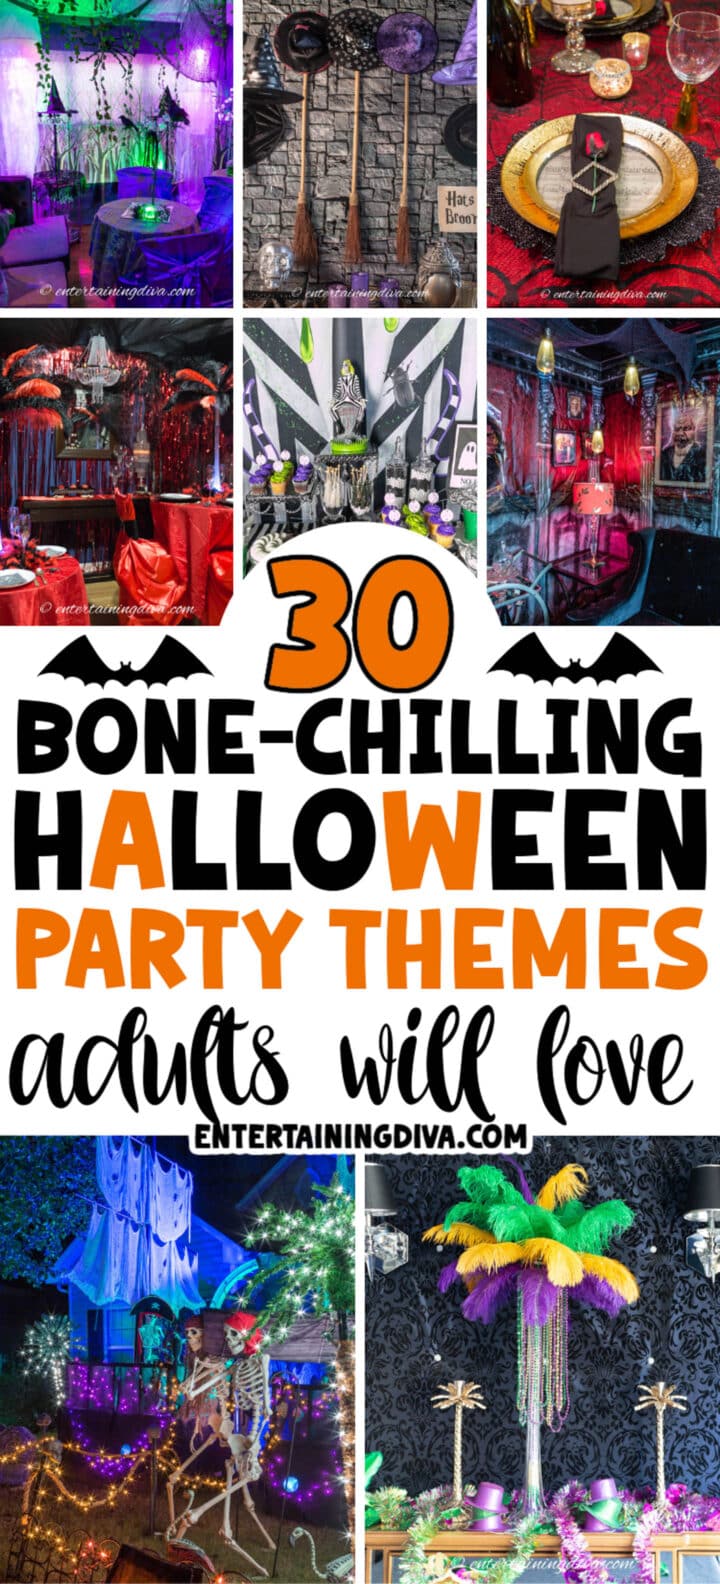 30 bone chilling halloween party themes adults will love.